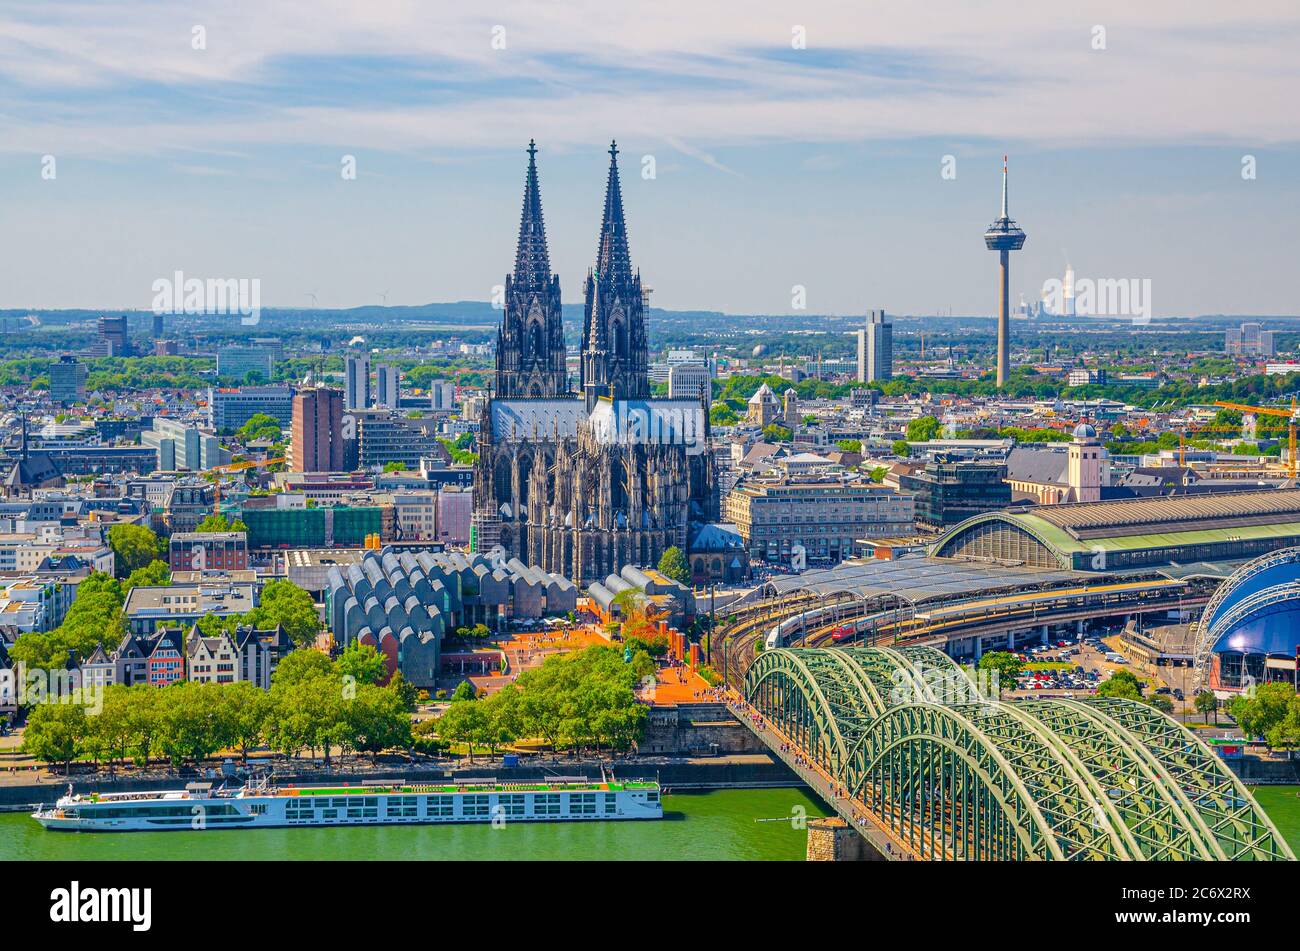 Aerial view of Cologne cityscape of historical city centre with Cologne Cathedral, central railway station Hauptbahnhof and Hohenzollern Bridge across Rhine river, North Rhine-Westphalia, Germany Stock Photo